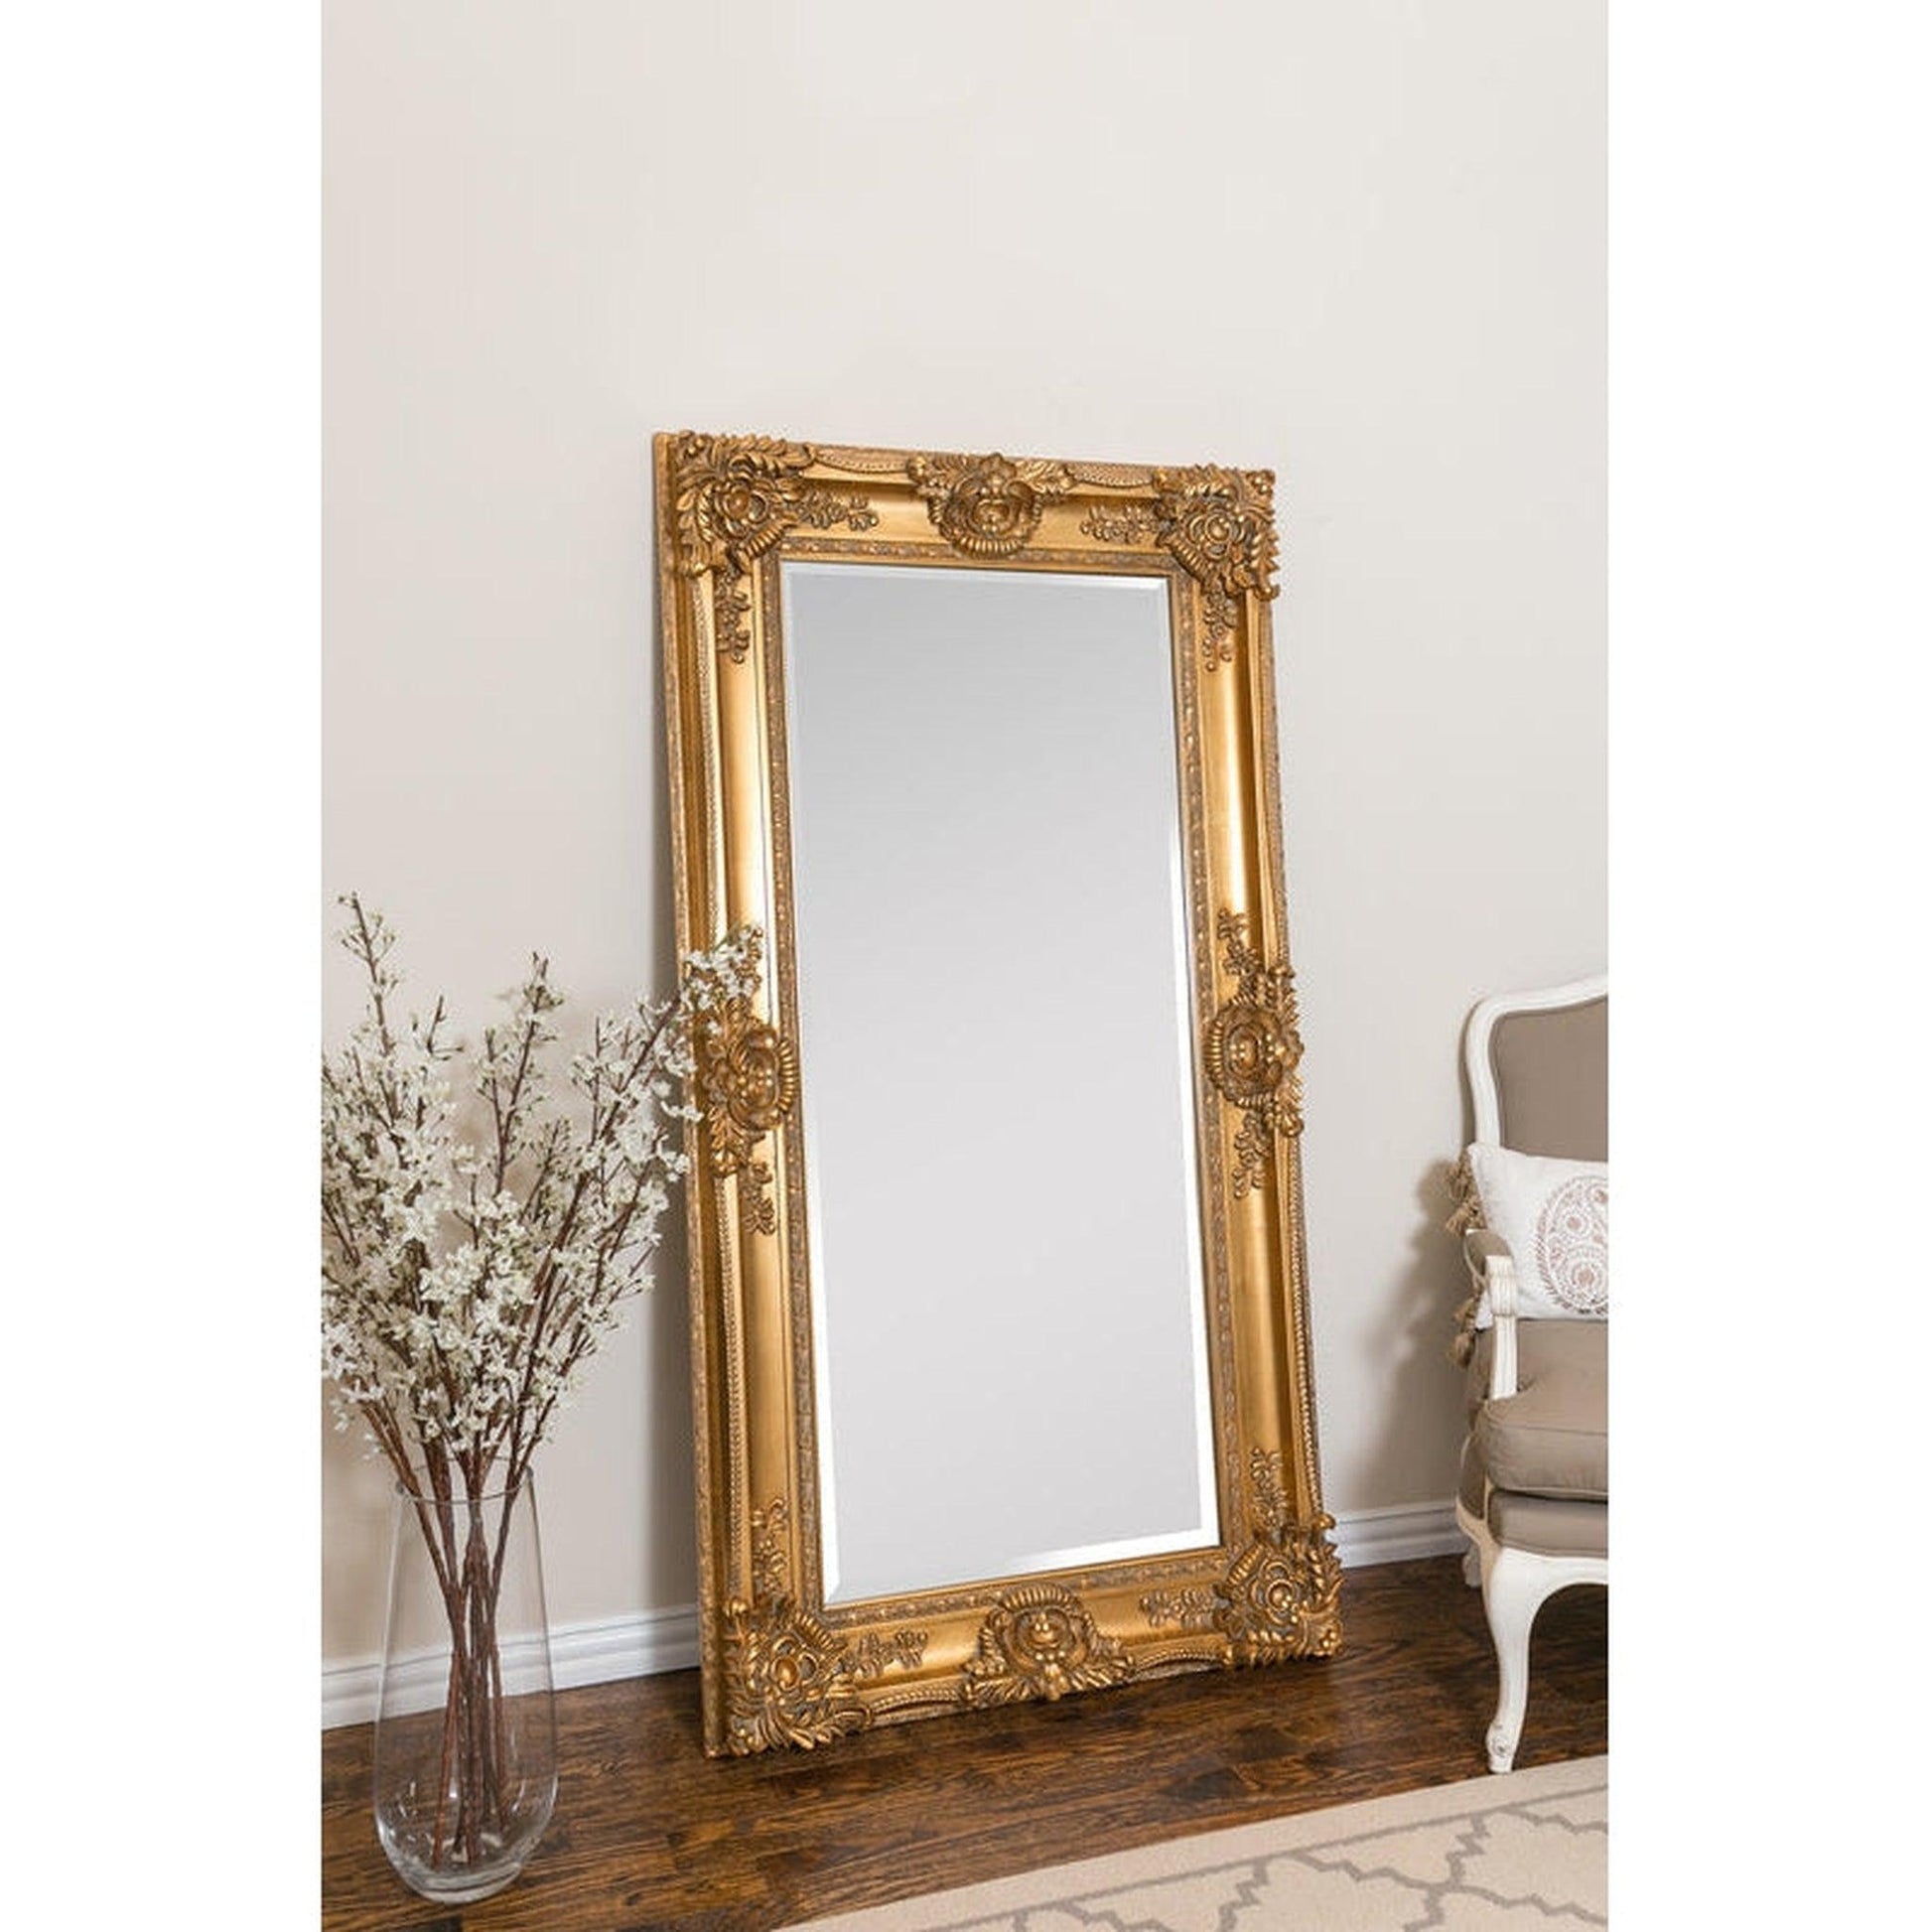 SBC Decor Mayfair Leaner 35" x 67" Wall-Mounted Wood Frame Dresser Mirror In Antique Gold Finish